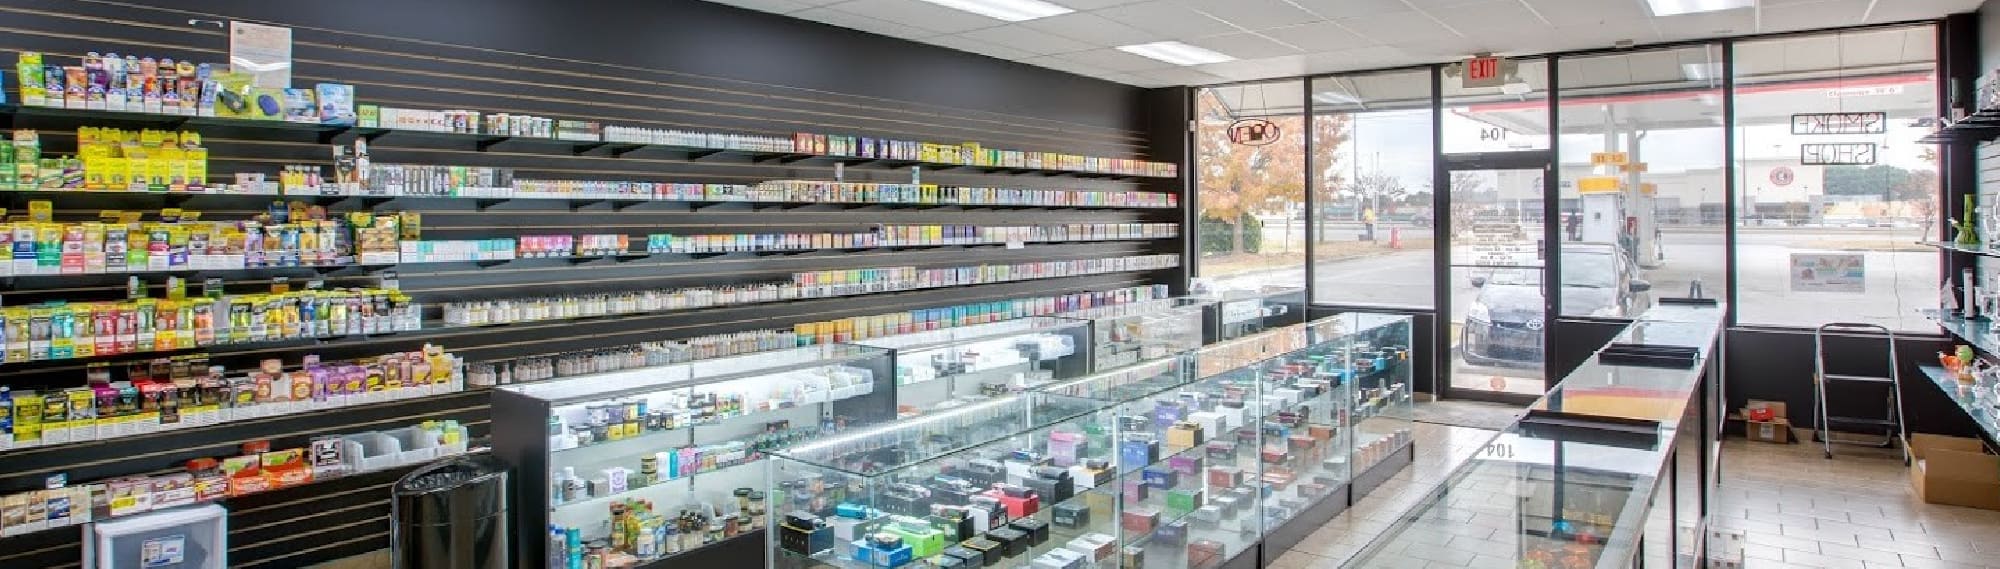 image of smoke shop in mexico